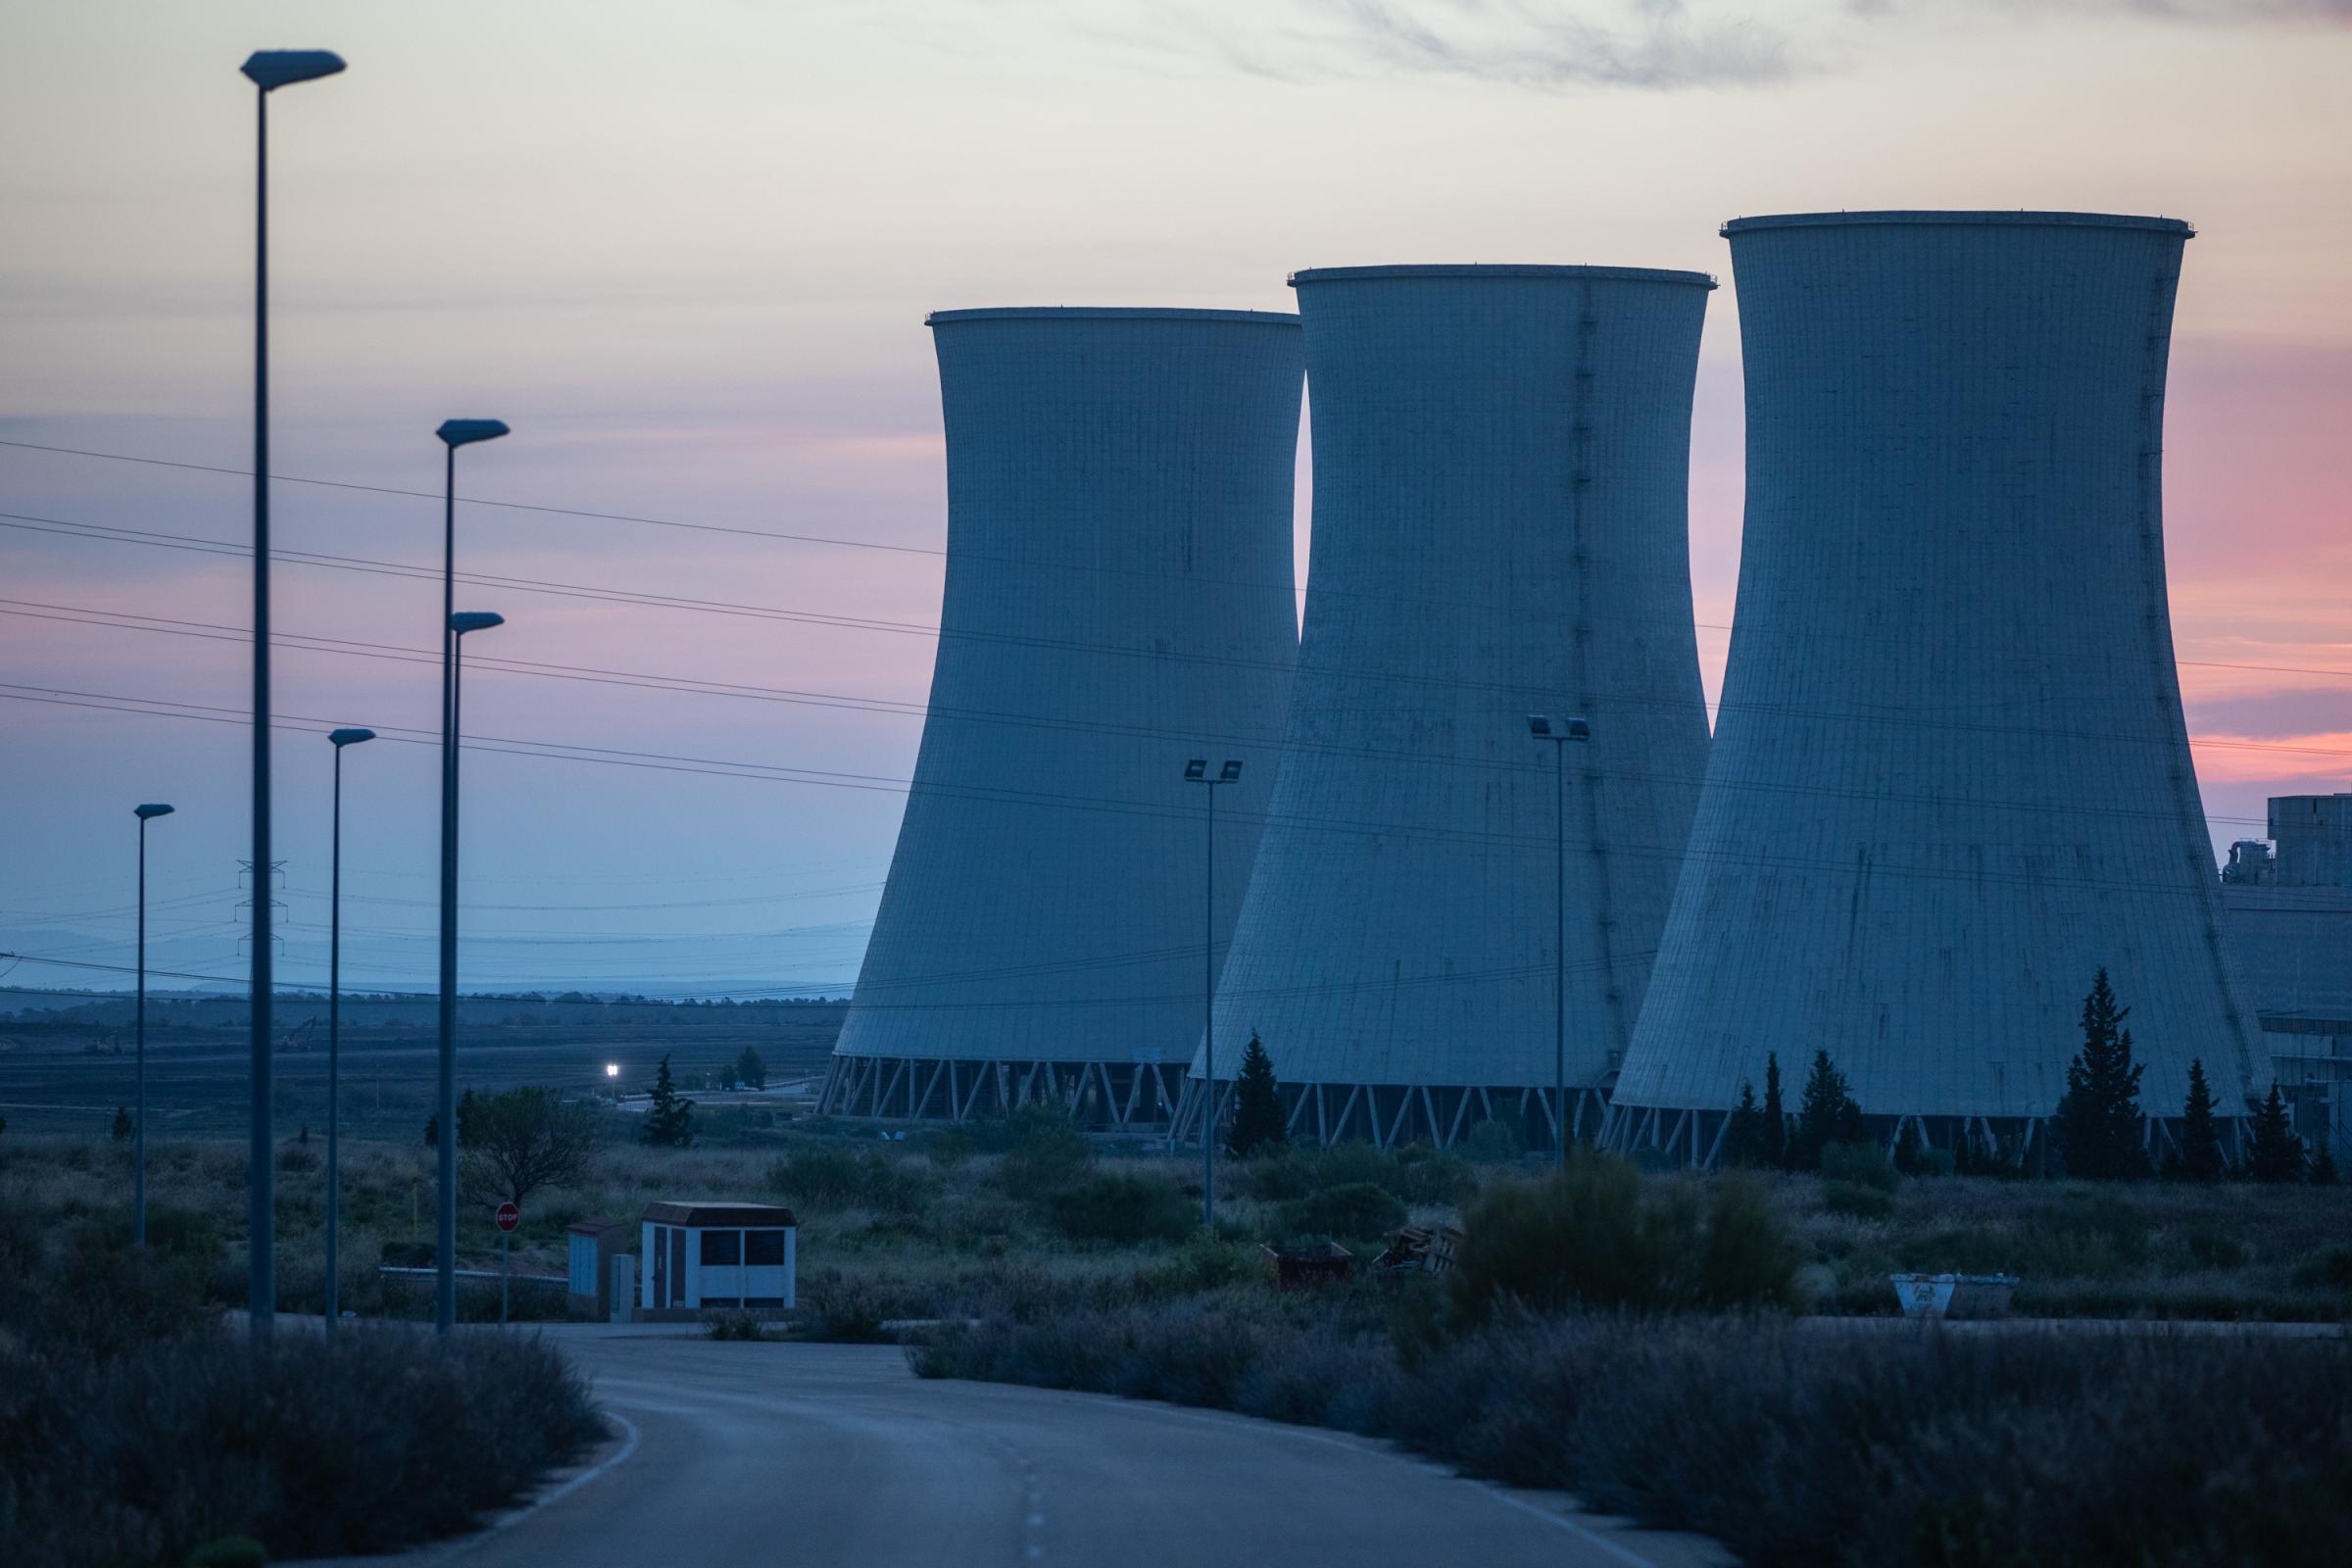 Demolition Of Andorra's Thermal Power Plants - ANDORRA, SPAIN - MAY 13: Sunrise at the thermal power...